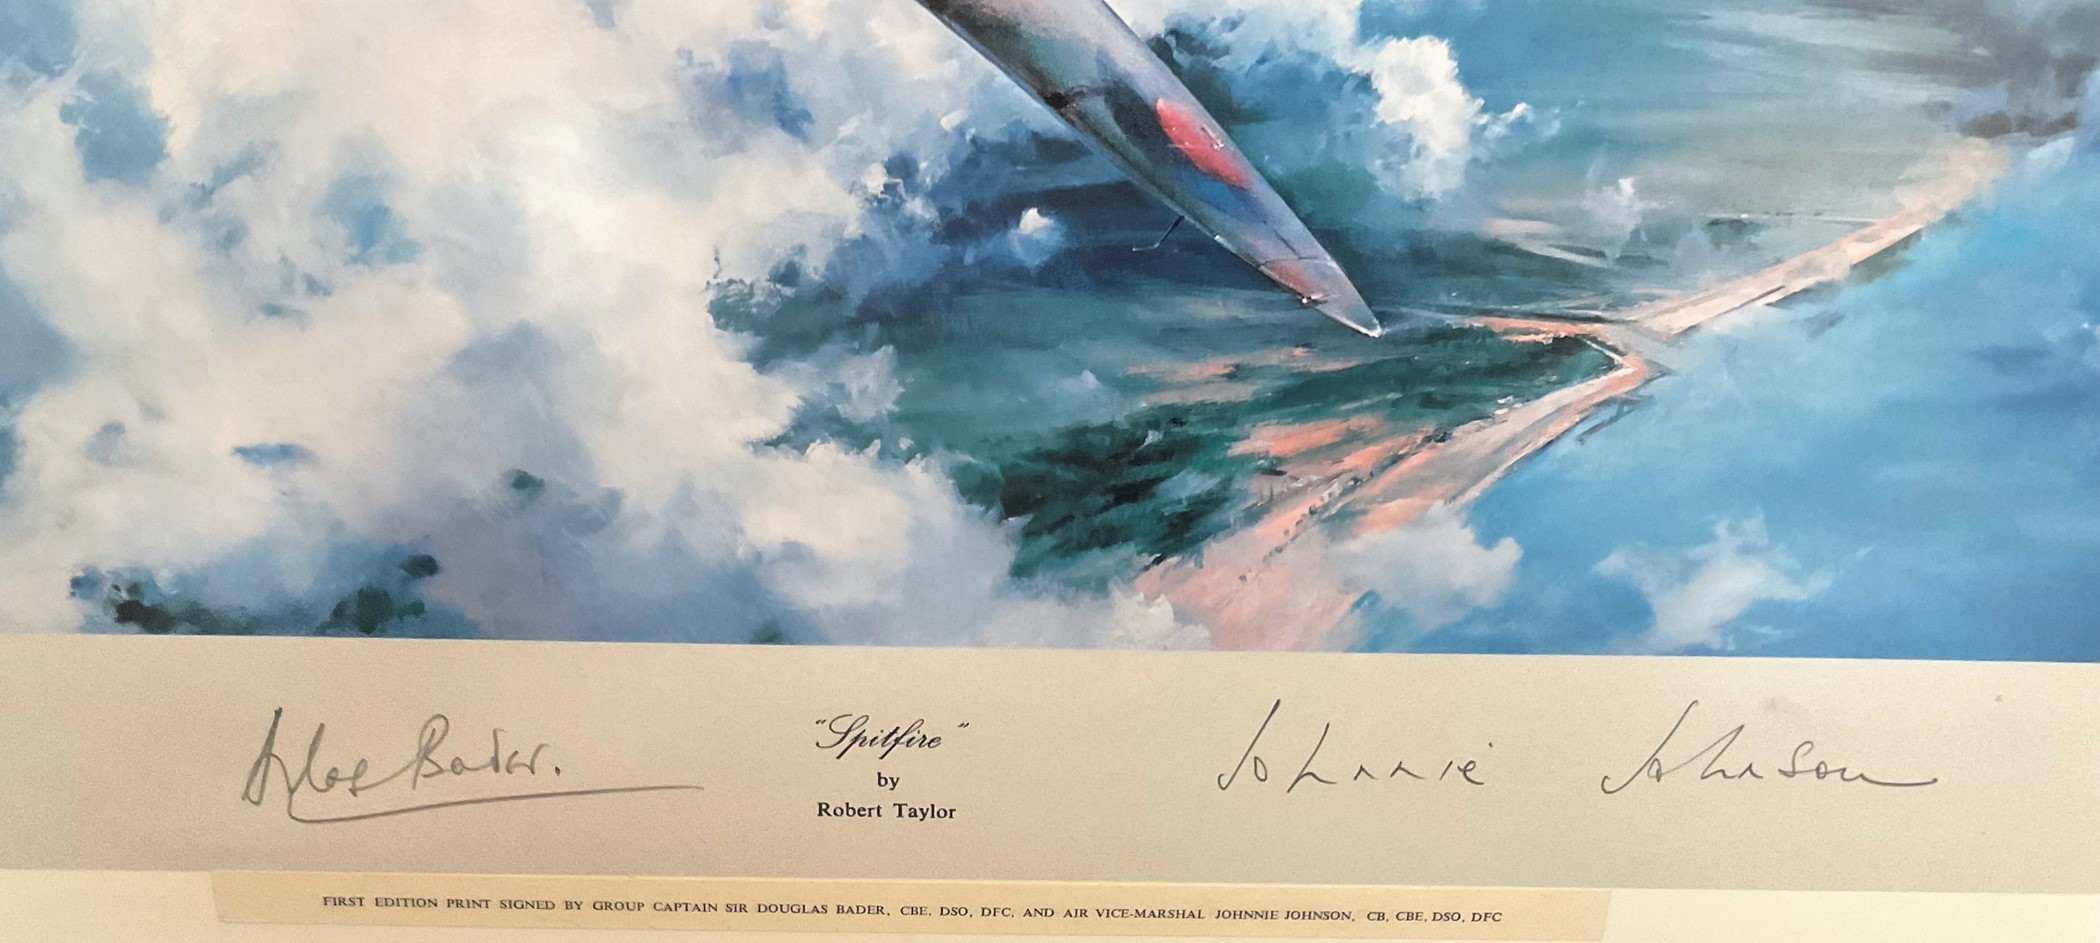 World War II Grp Cpt Douglas Bader and AVM Johnnie Johnson signed Robert Taylor 26x23 mounted and - Image 2 of 2